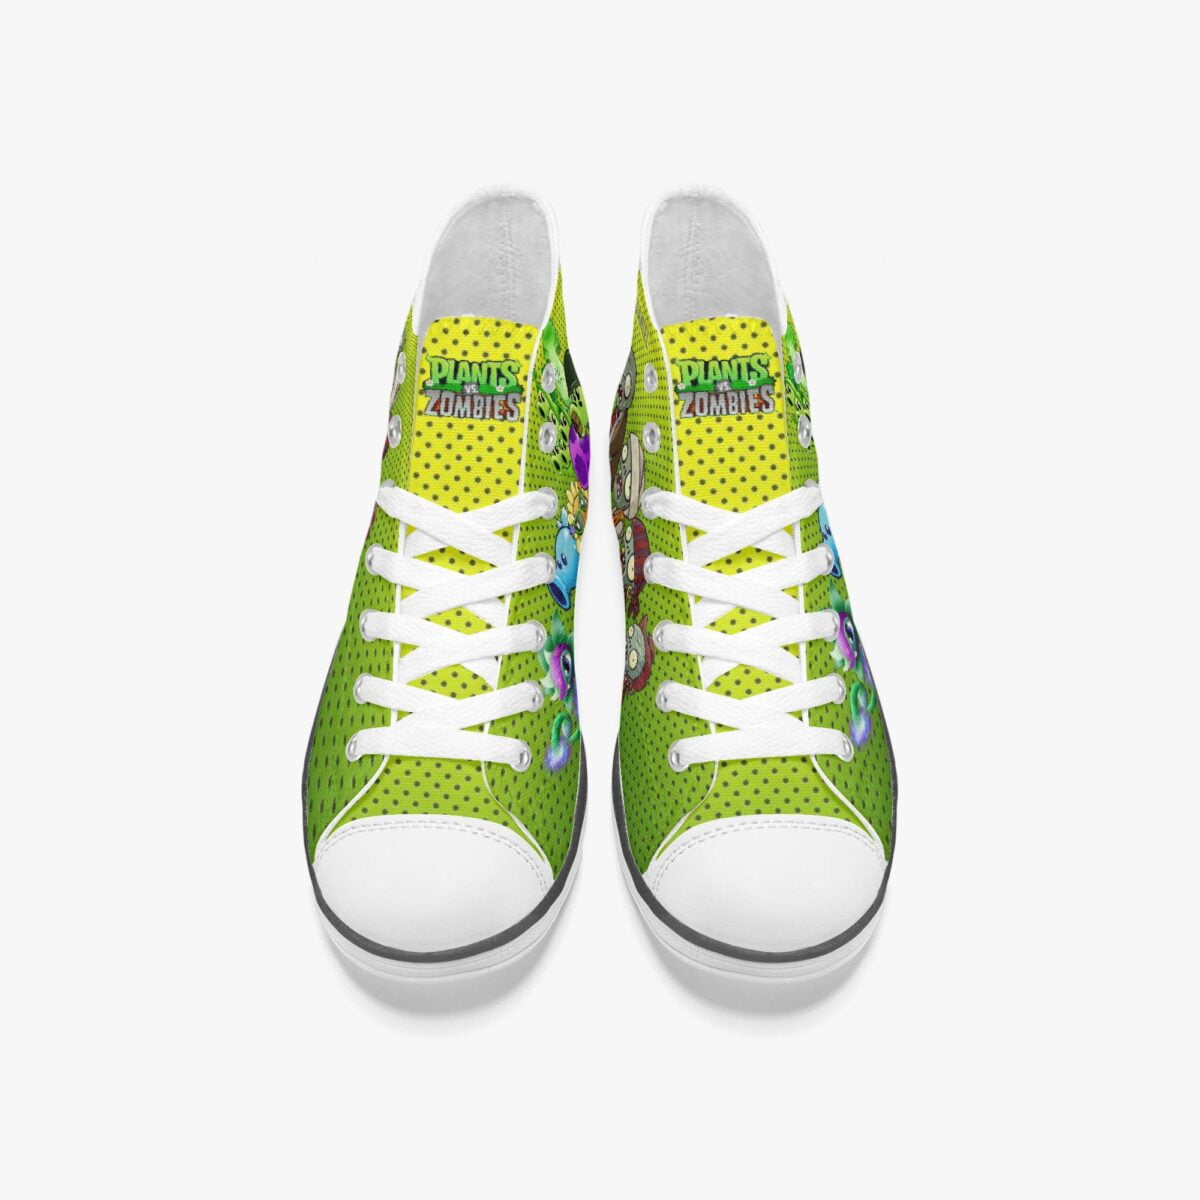 Plants vs Zombies Personalized High-Top Sneakers for Children Cool Kiddo 14